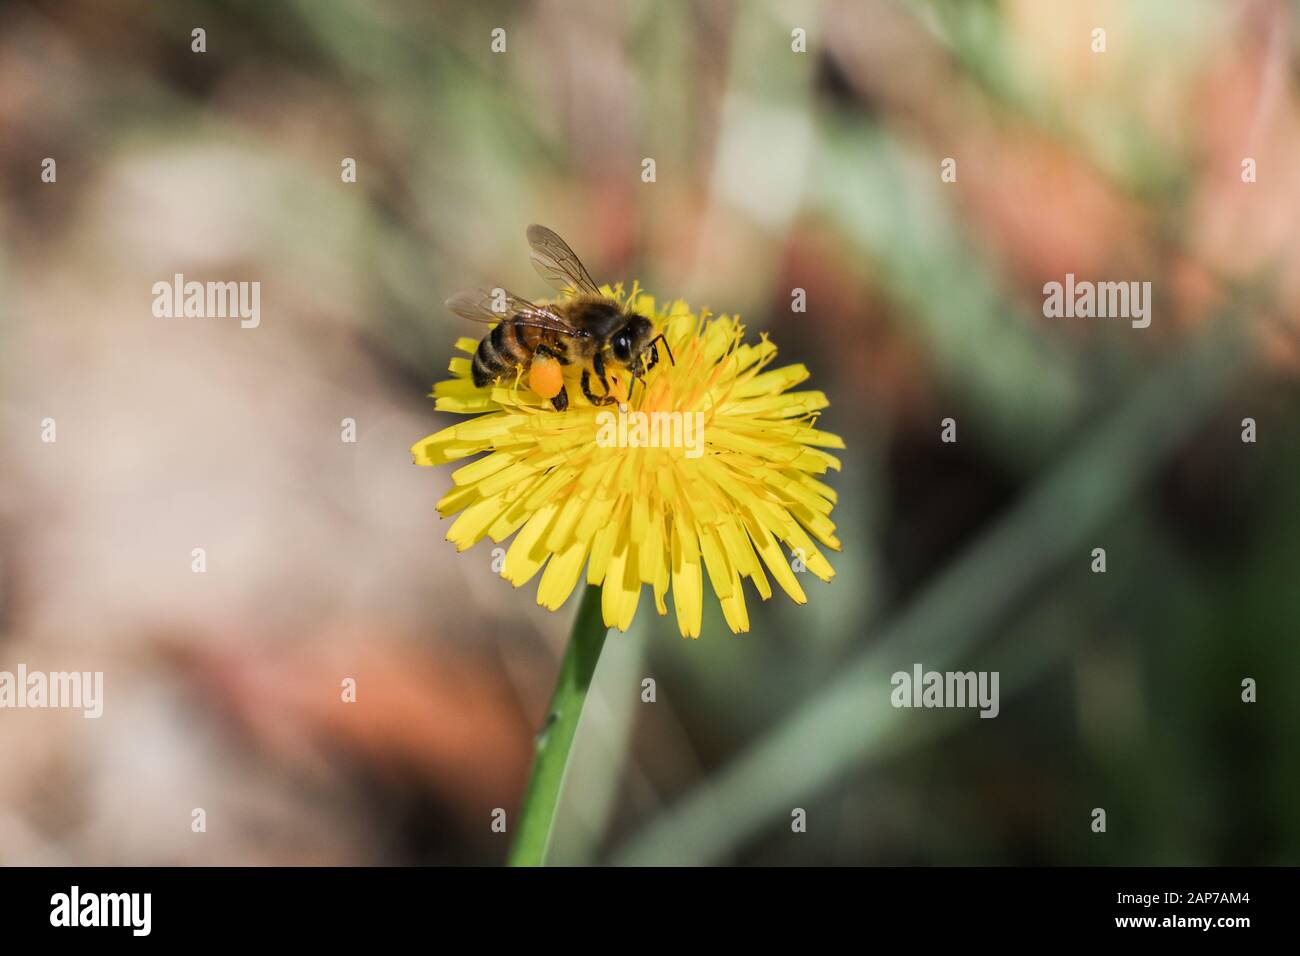 A tiny bee sitting on a yellow Flower Stock Photo